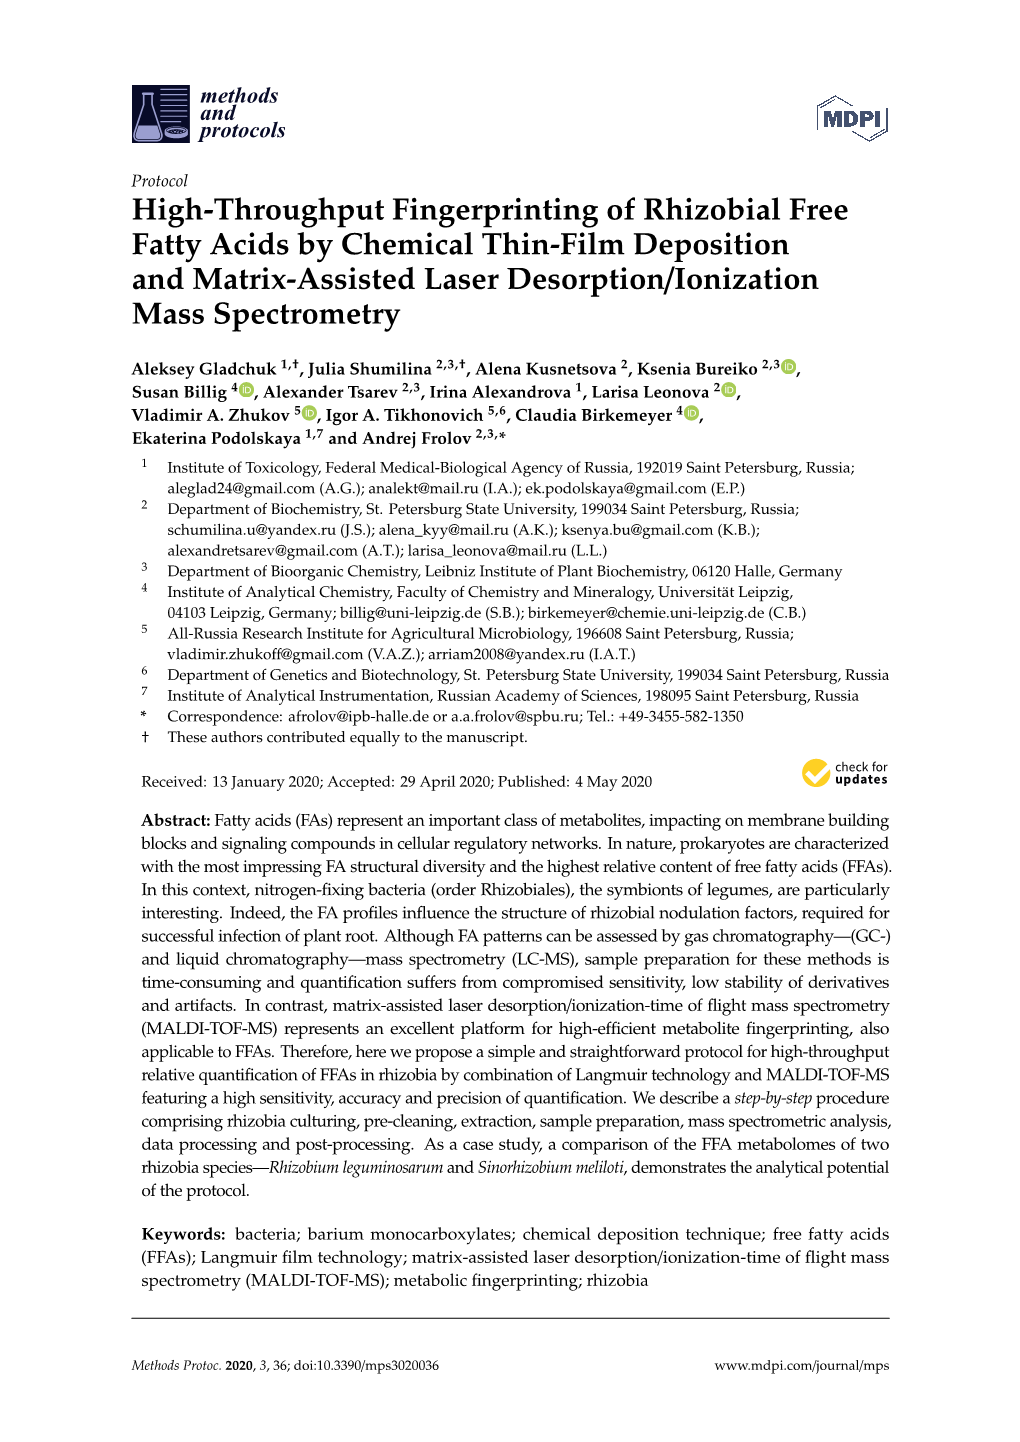 High-Throughput Fingerprinting of Rhizobial Free Fatty Acids by Chemical Thin-Film Deposition and Matrix-Assisted Laser Desorption/Ionization Mass Spectrometry